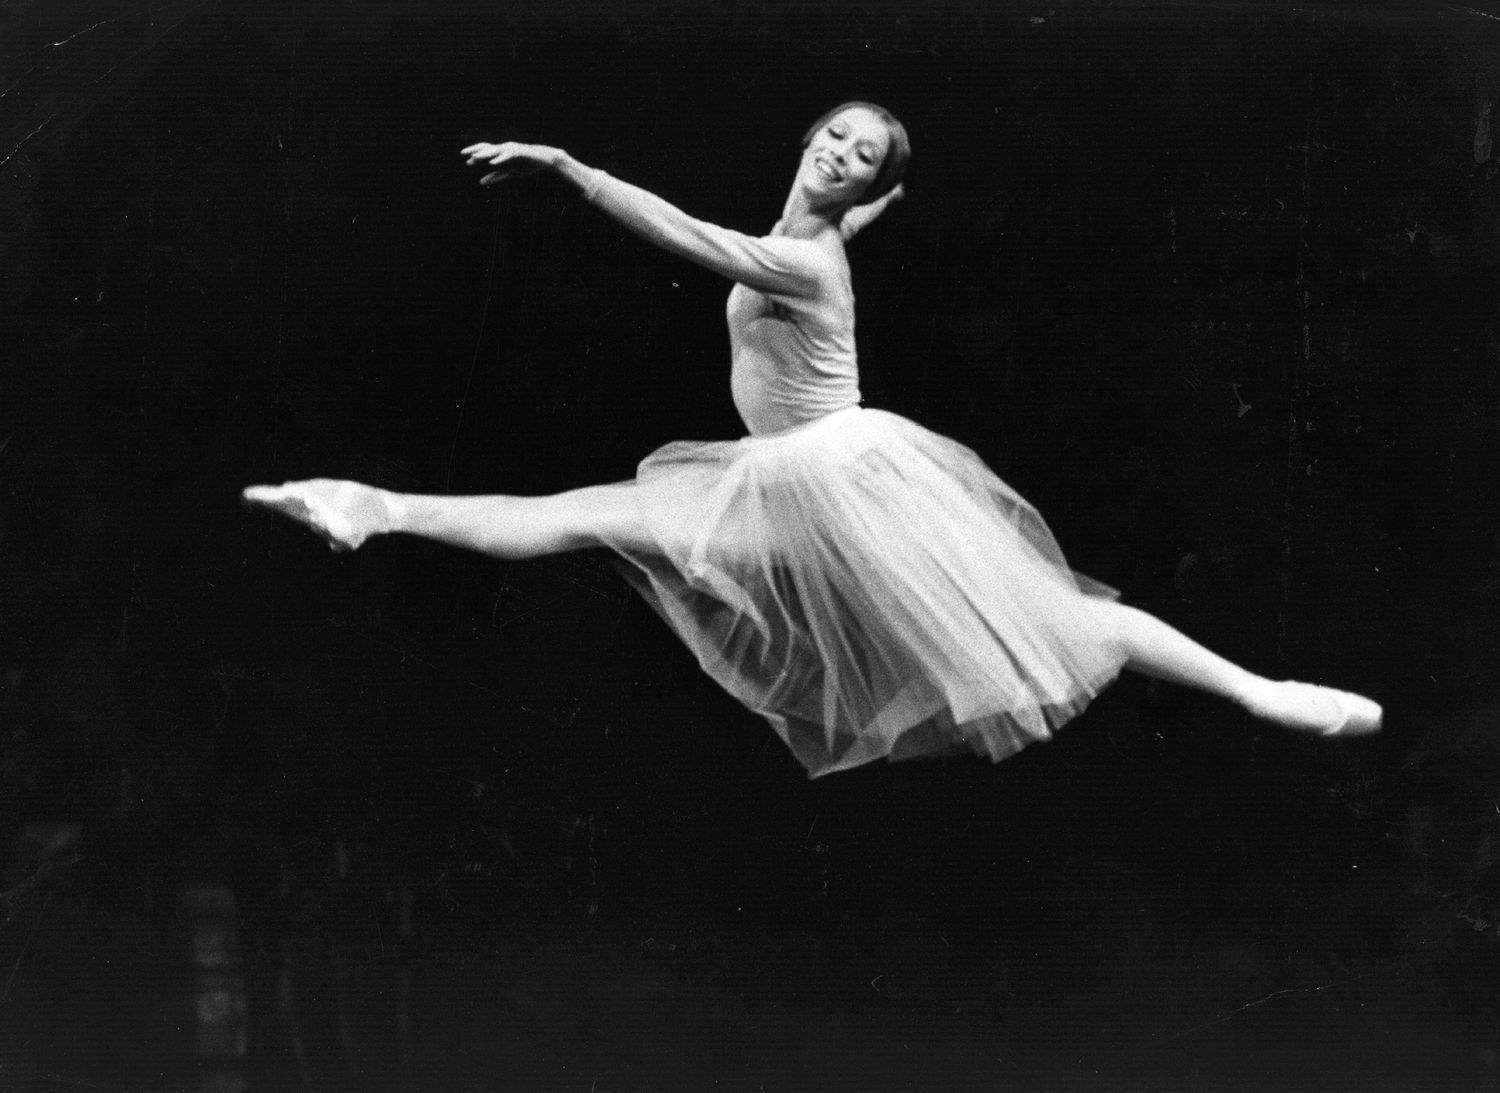 What Russian Figure Played A Crucial Role In The Development Of Twentieth-Century Ballet?